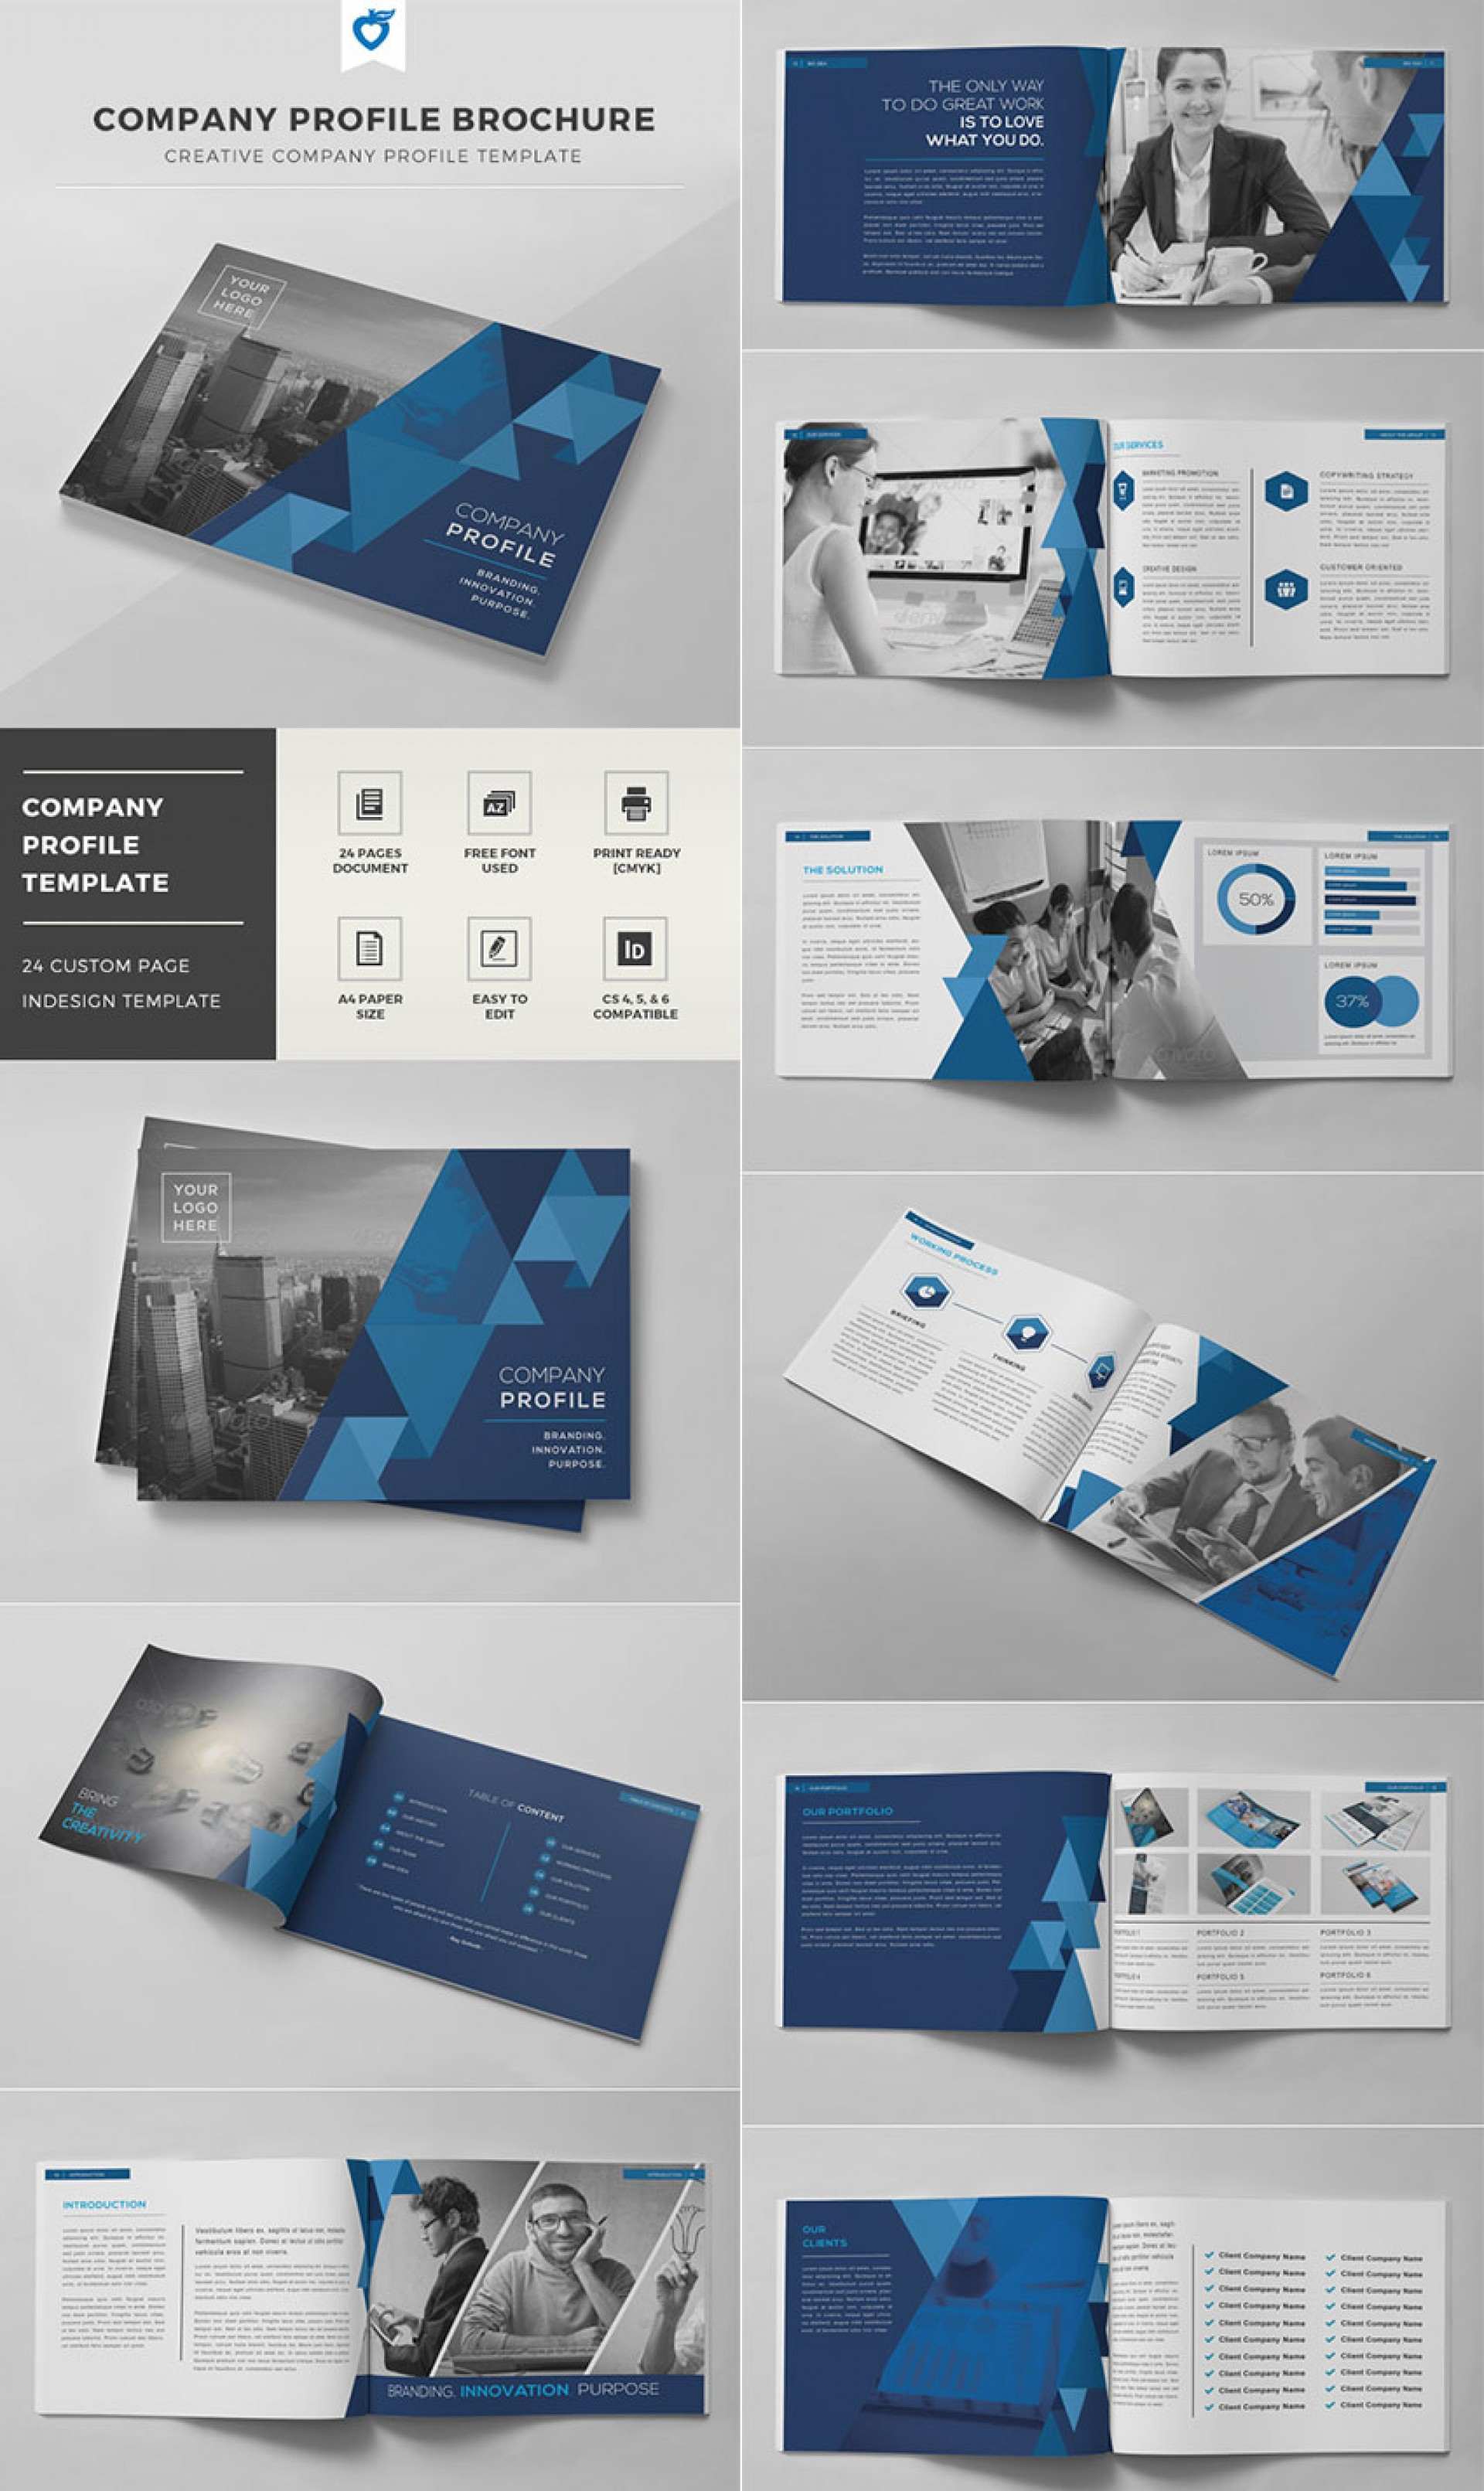 Indesign Template Free Brochure 004 Ideas Templates Company With Indesign Templates Free Download Brochure